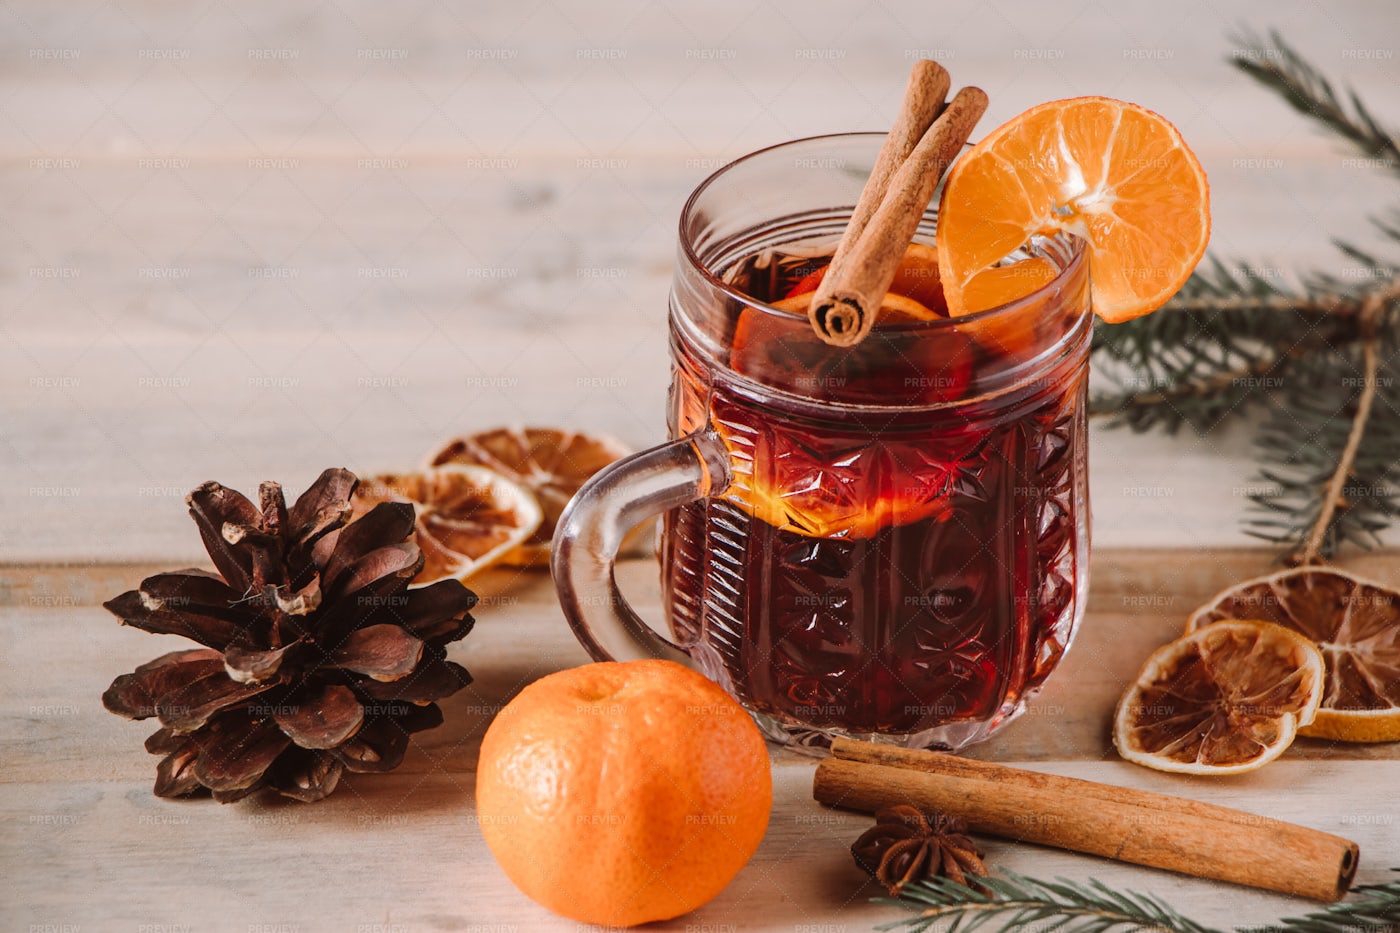 Hot Mulled Wine With Fruits: Stock Photos